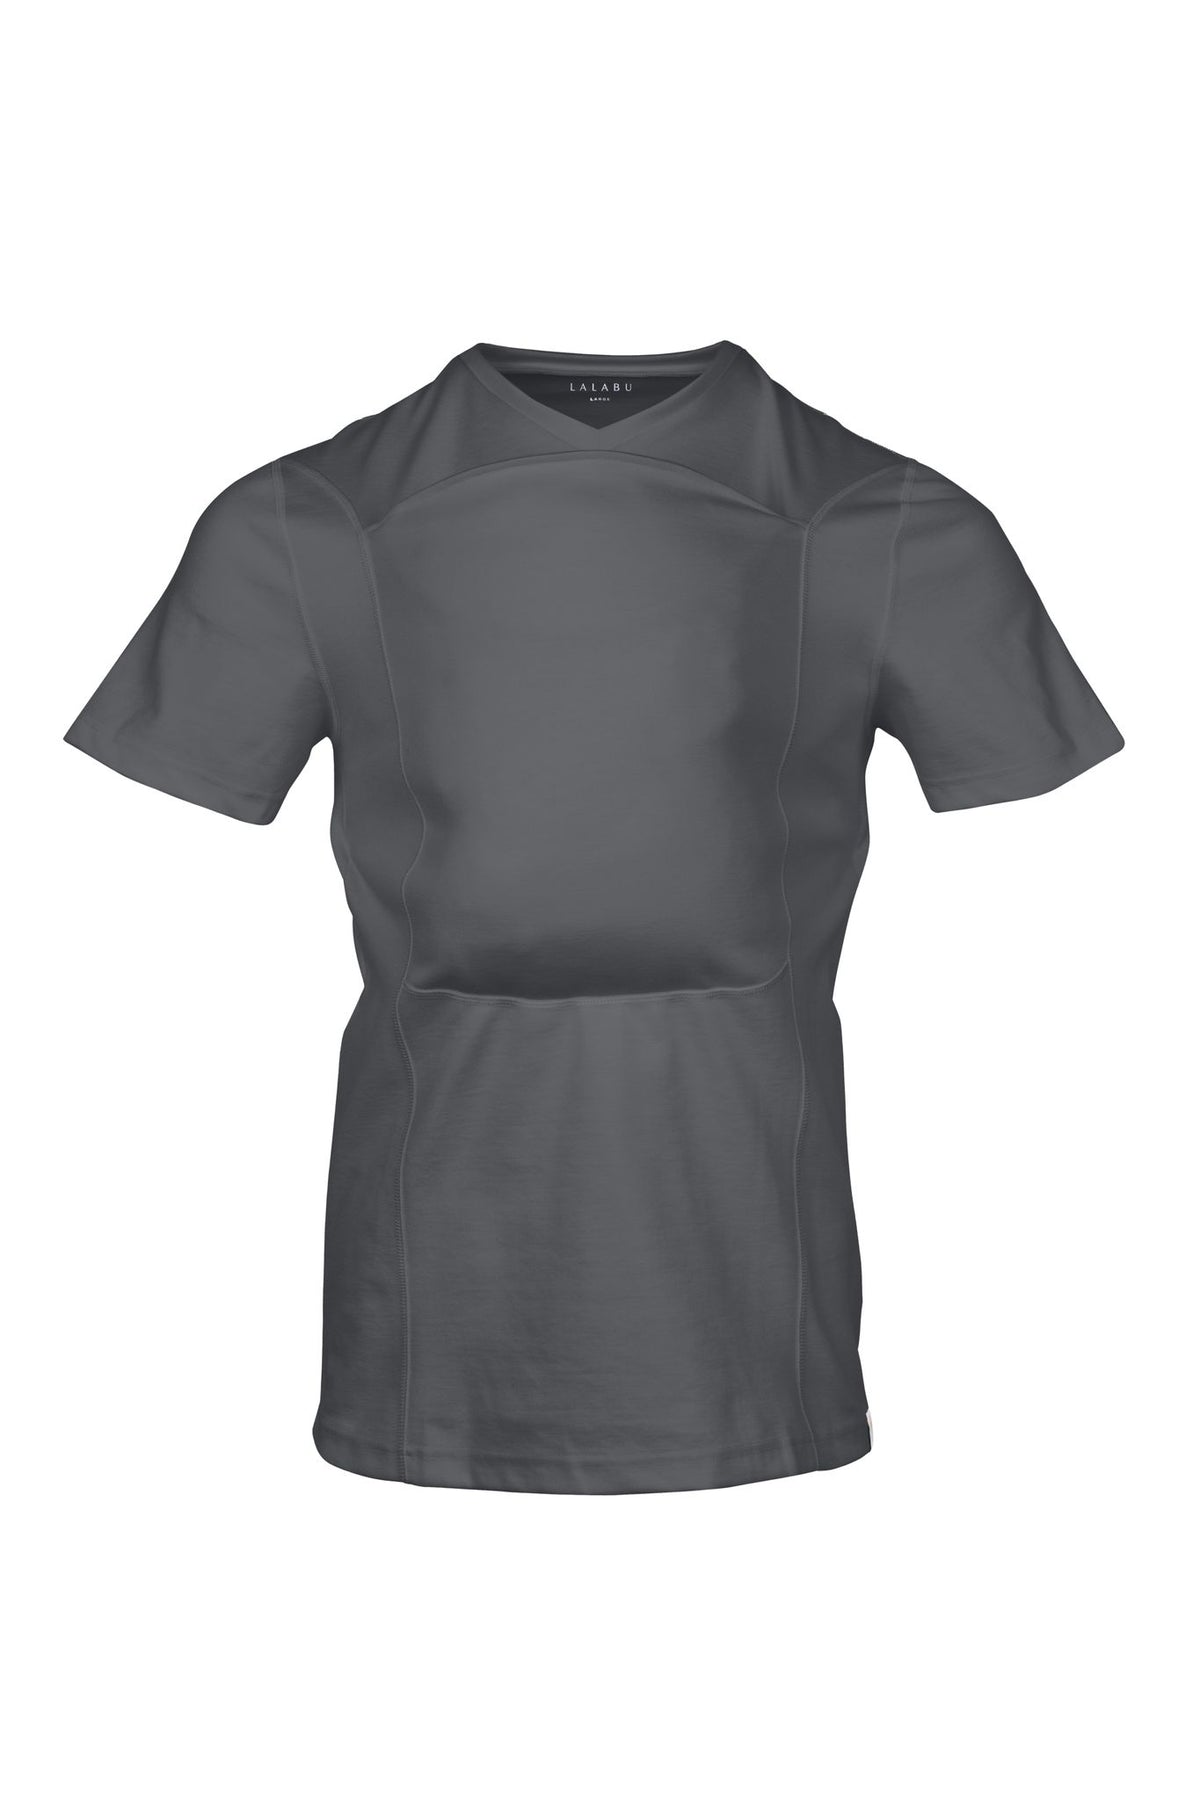 Short sleeve v-neck Dad Shirt with a front pouch for wearing a newborn in gray. Front view.